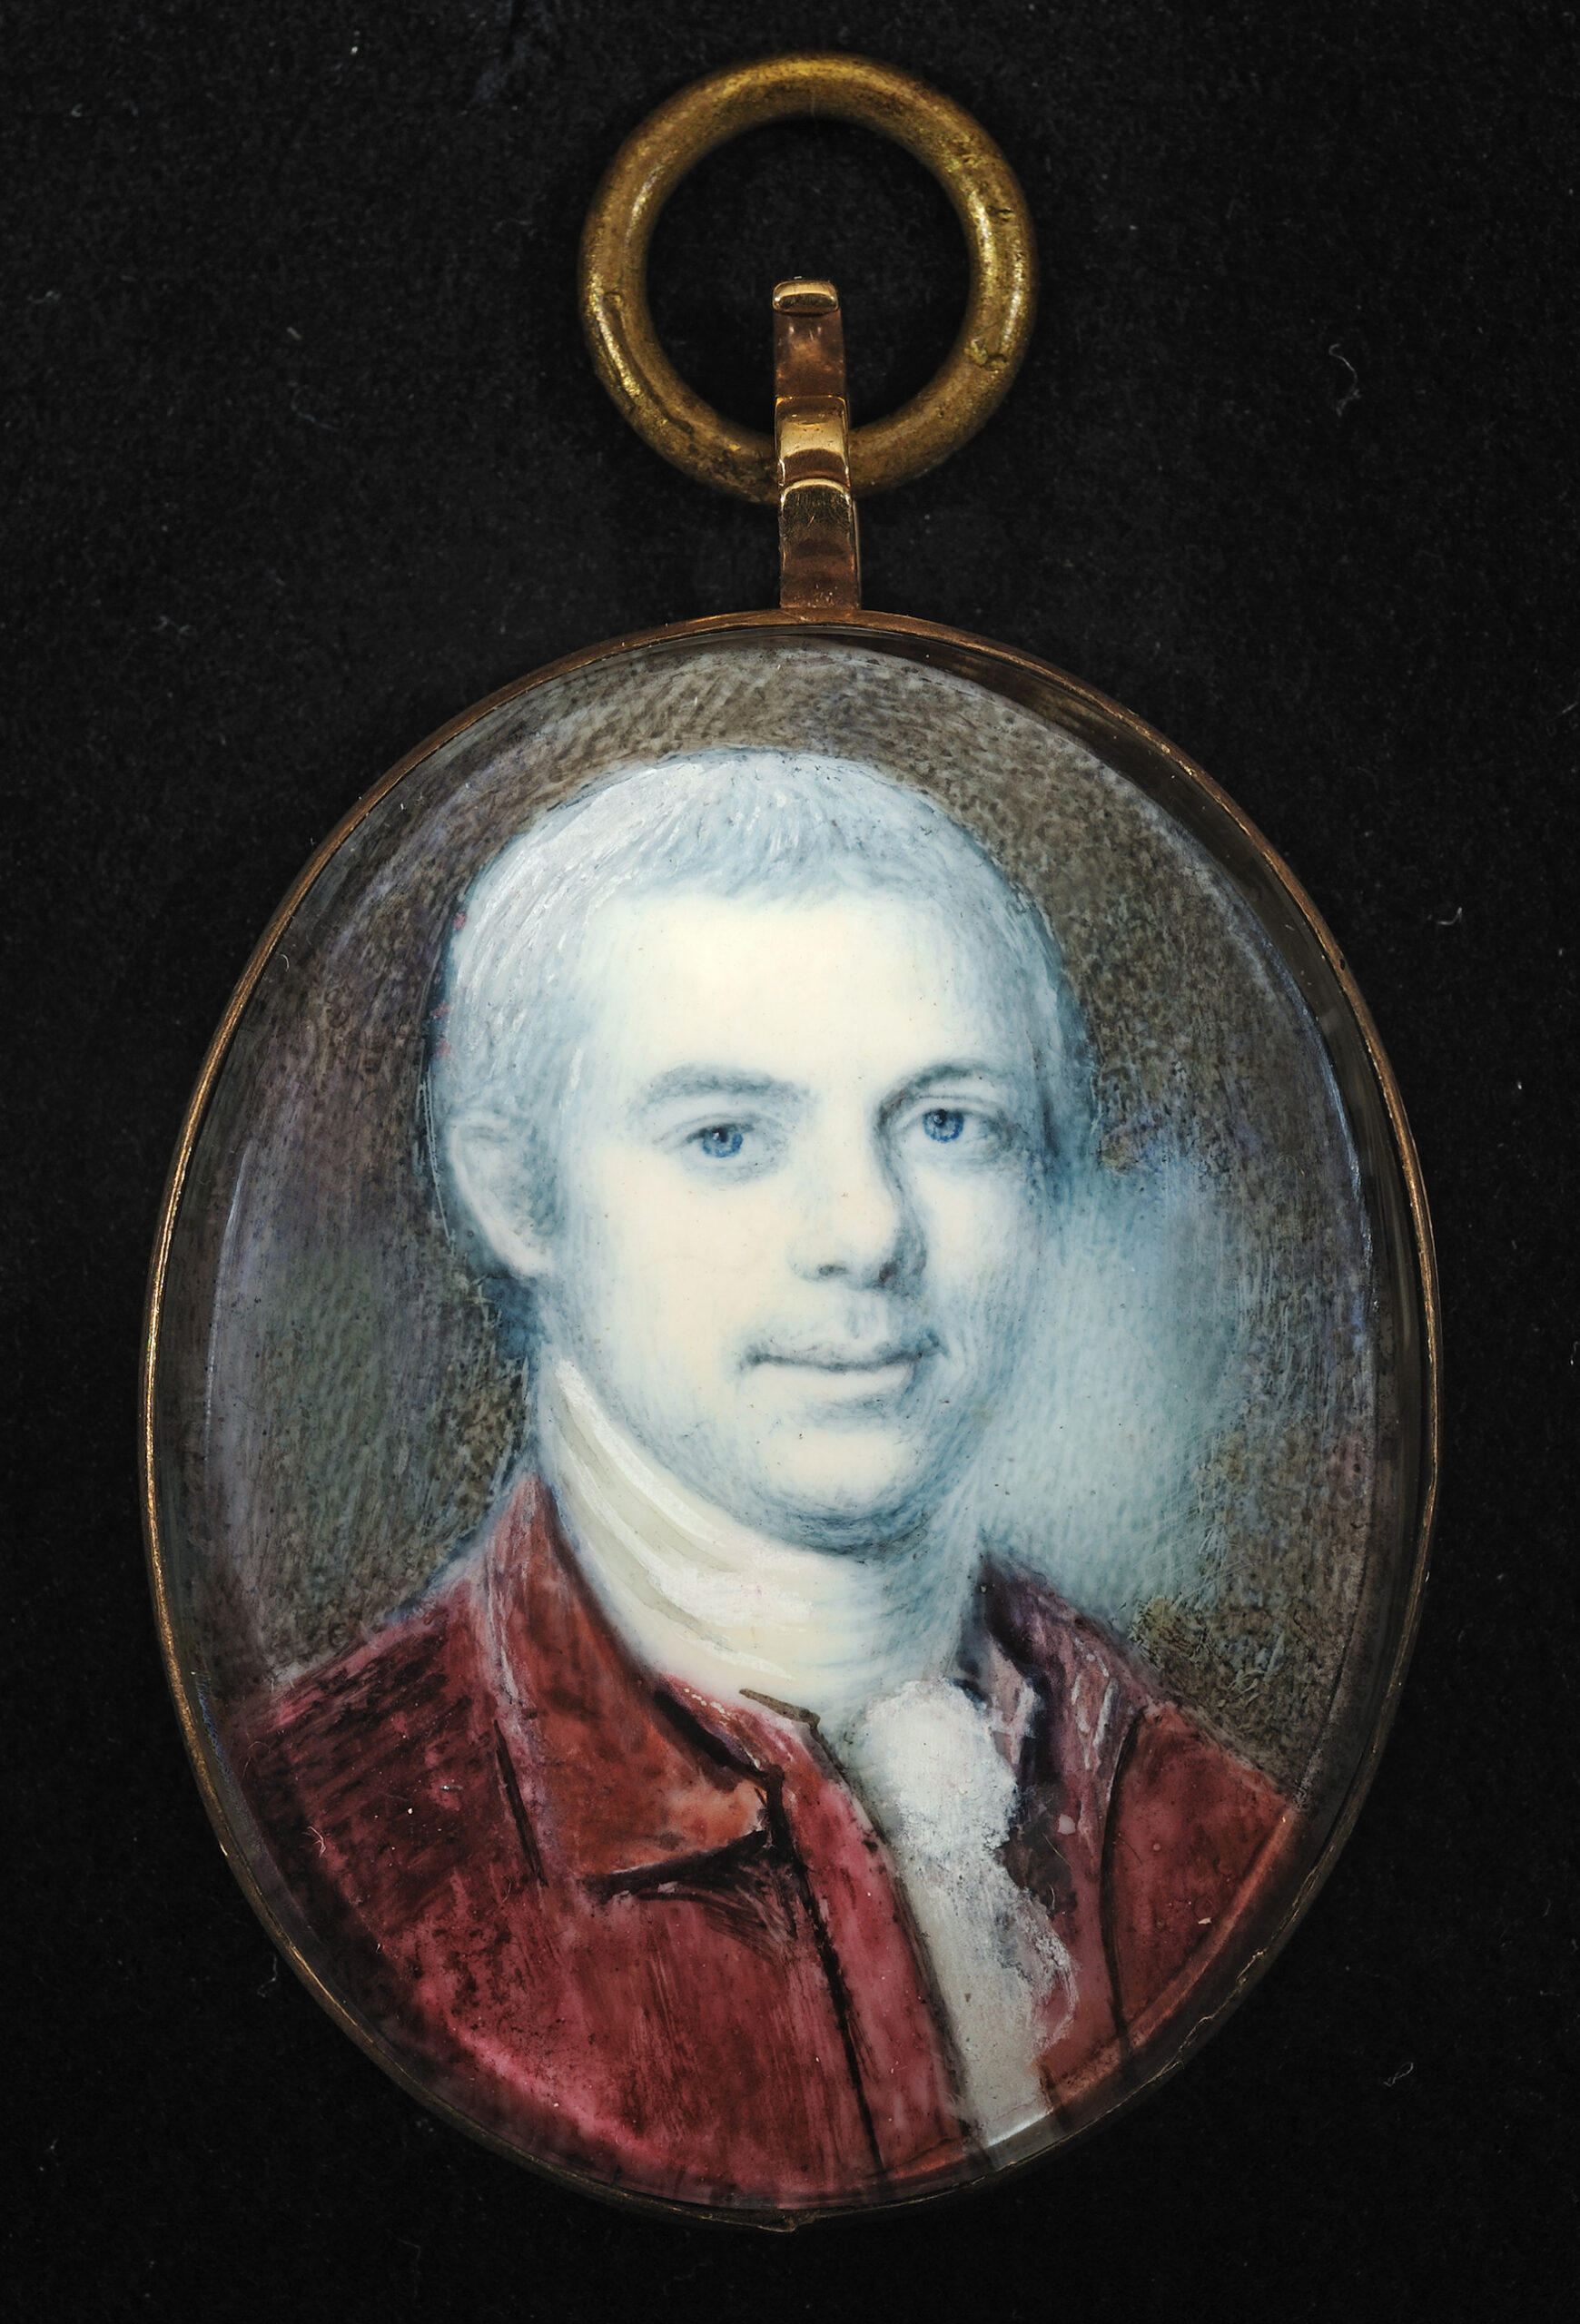 Nathan Dorsey portrait miniature by Charles Willson Peale circa 1775